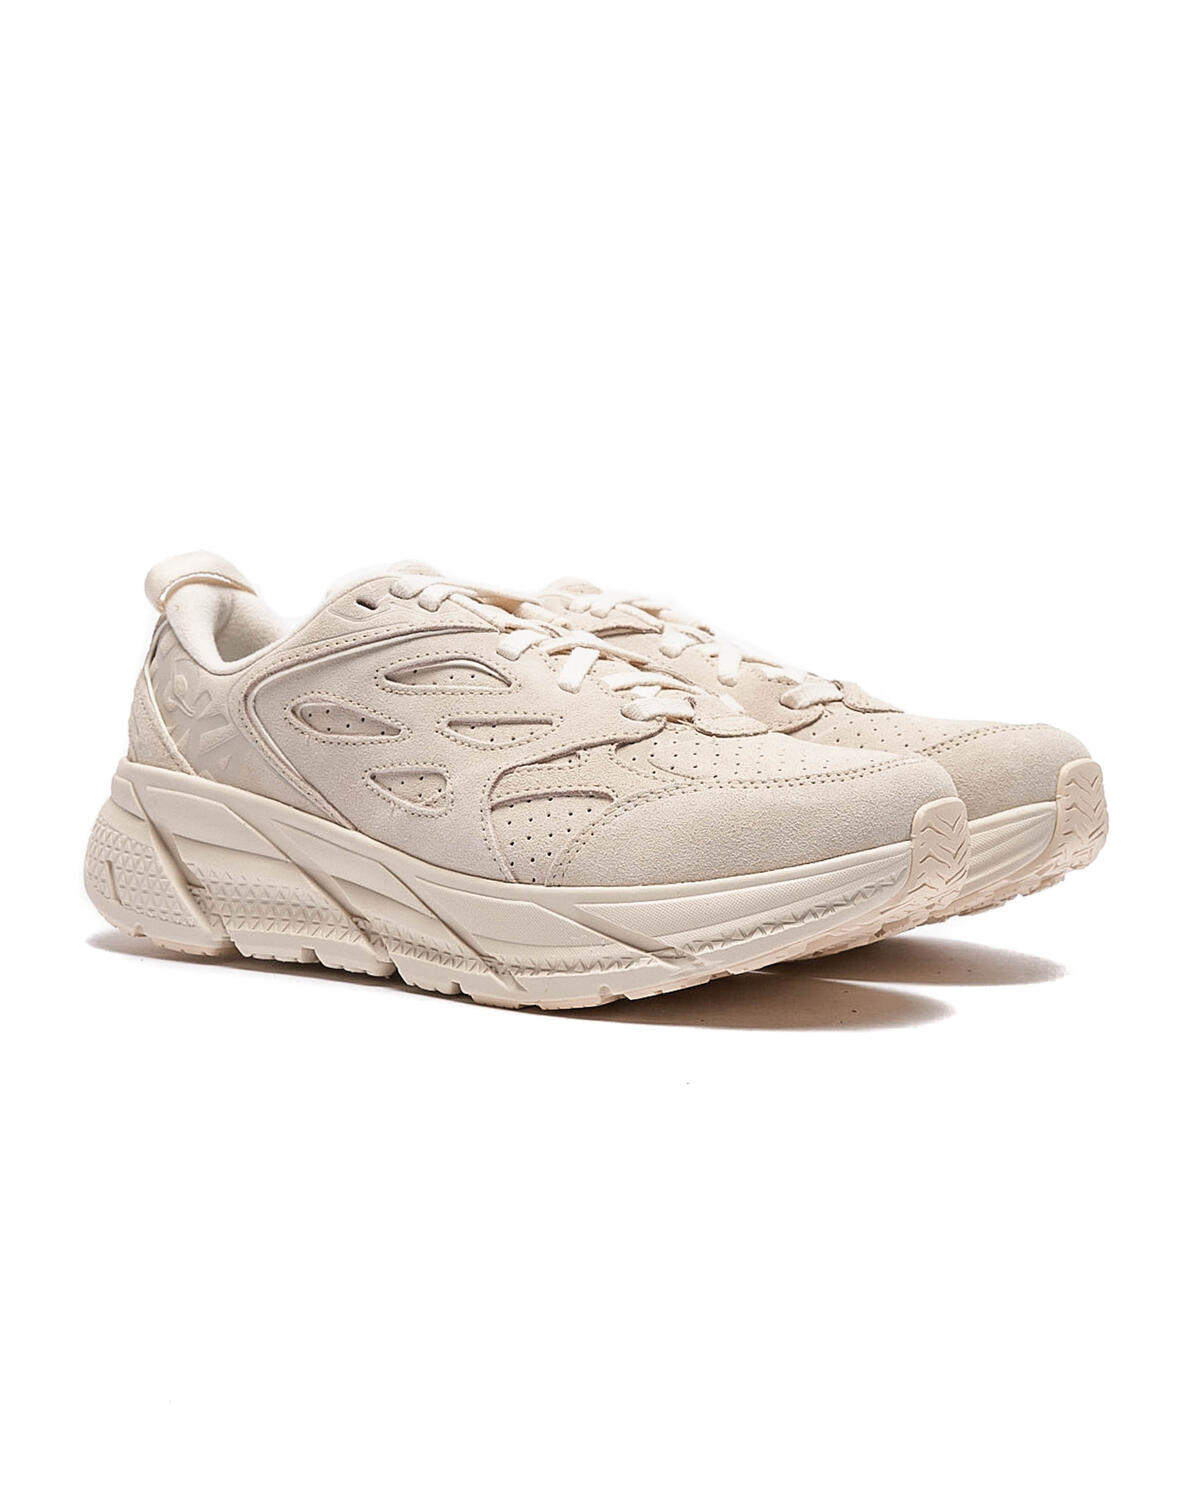 Hoka One One CLIFTON L SUEDE | 1122571-EEGG | AFEW STORE